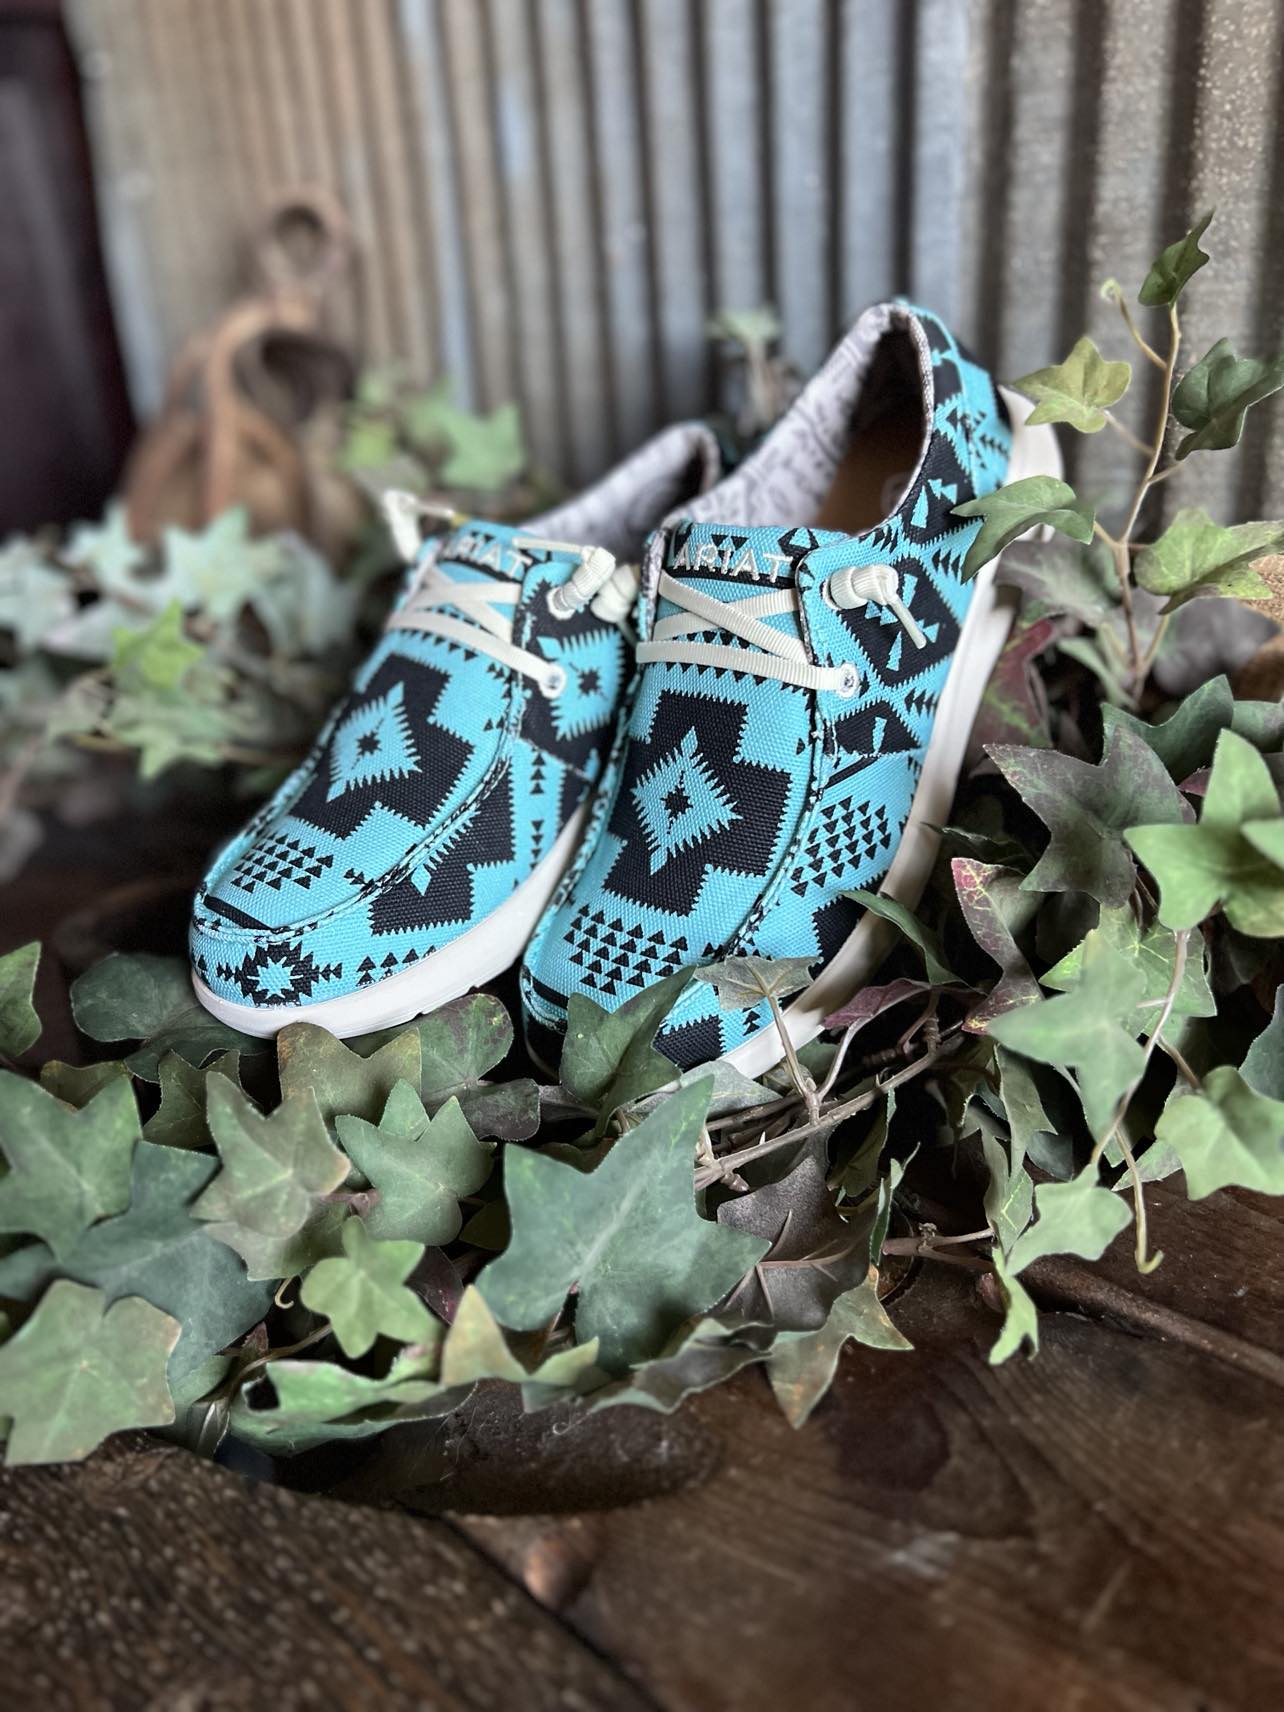 Womens Ariat Hilo Sneaker in Turquoise Saddle Blanket-Women's Casual Shoes-Ariat-Lucky J Boots & More, Women's, Men's, & Kids Western Store Located in Carthage, MO